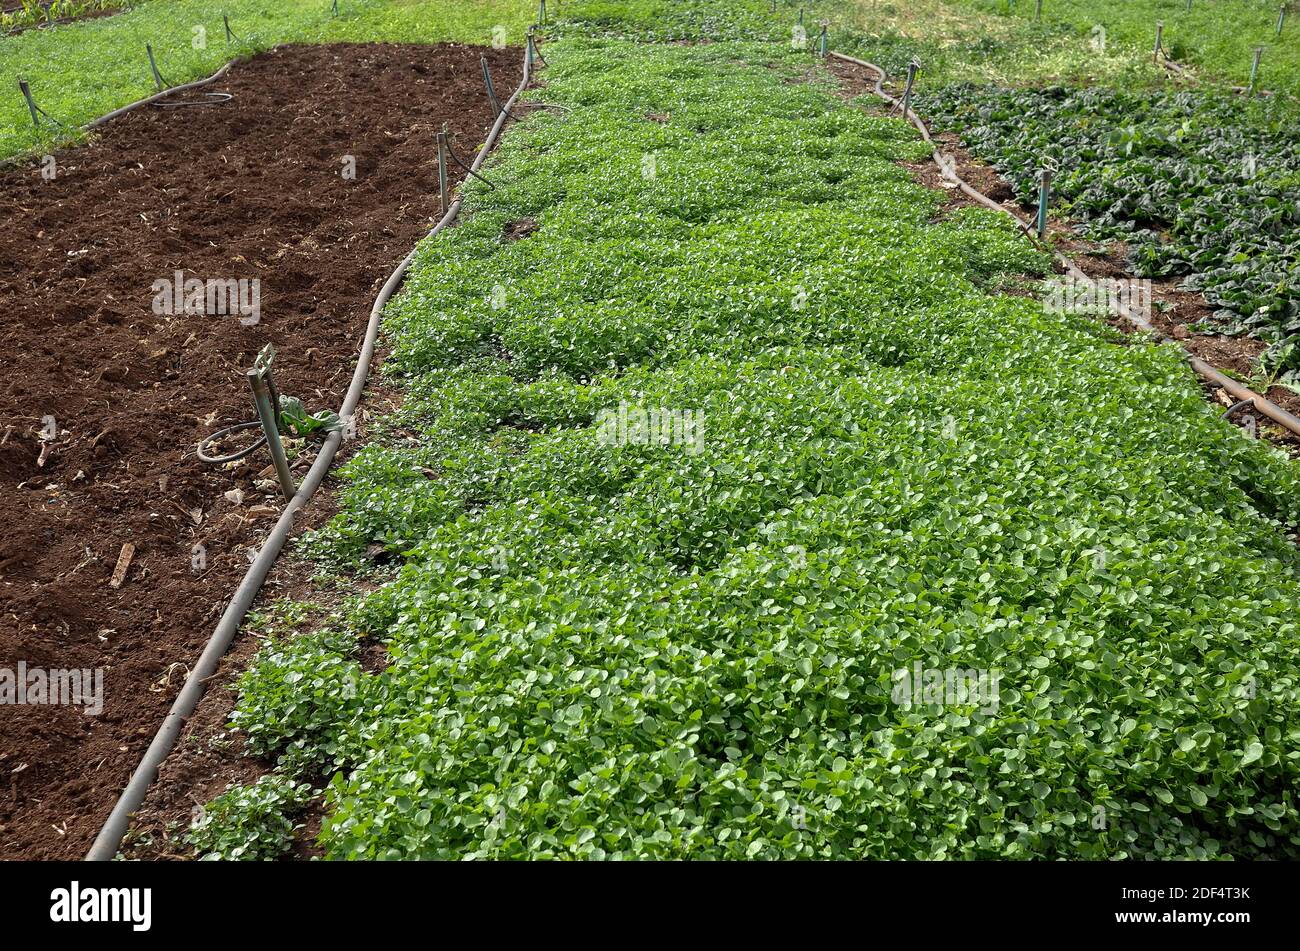 Watercress grown in earth, instead of more common hydroponic cultivation Stock Photo